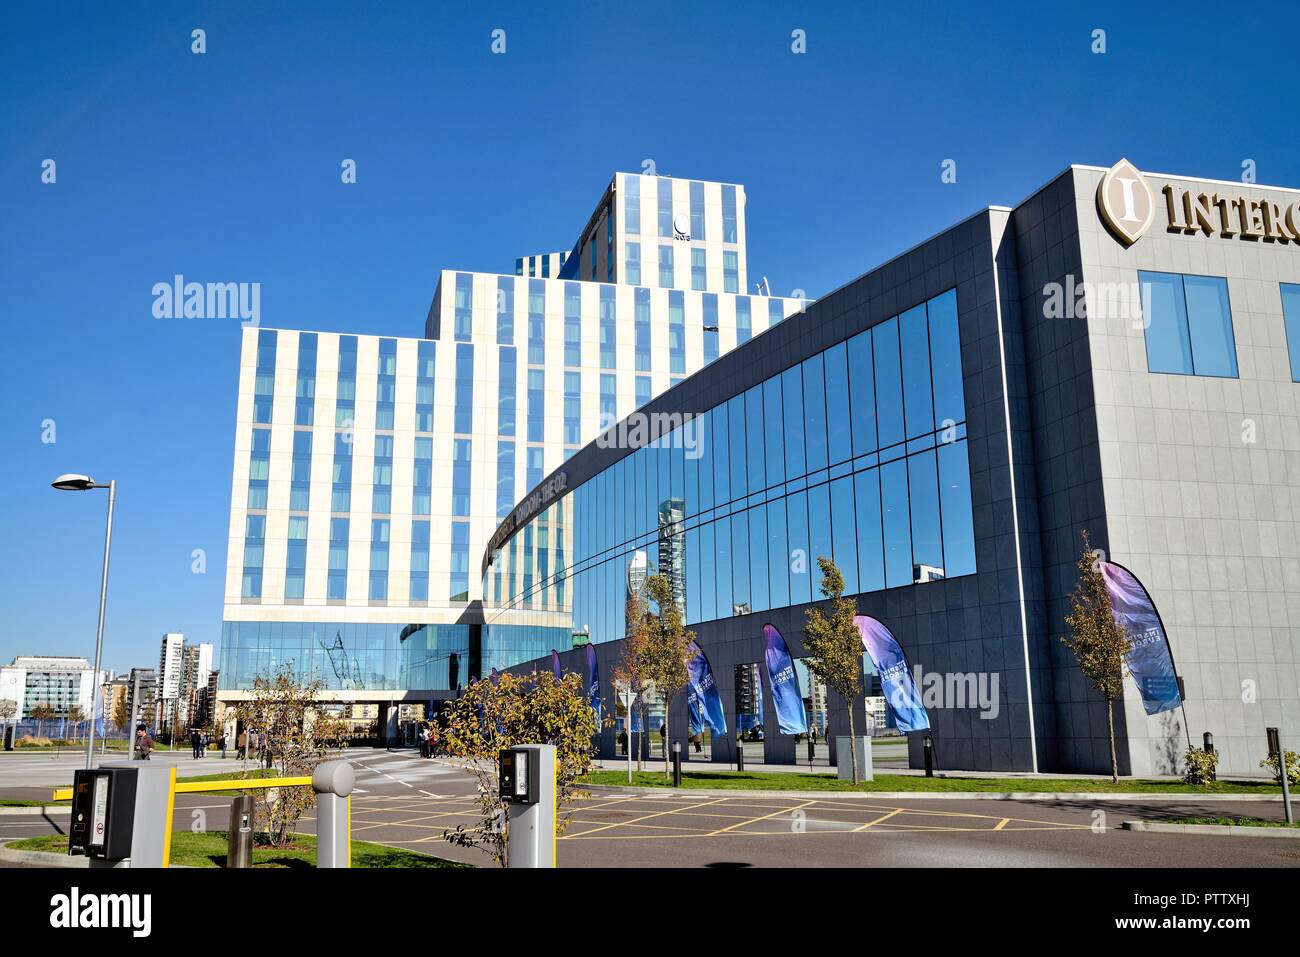 Exterior of the Intercontinental hotel at the O2 North Greenwich London England UK Stock Photo